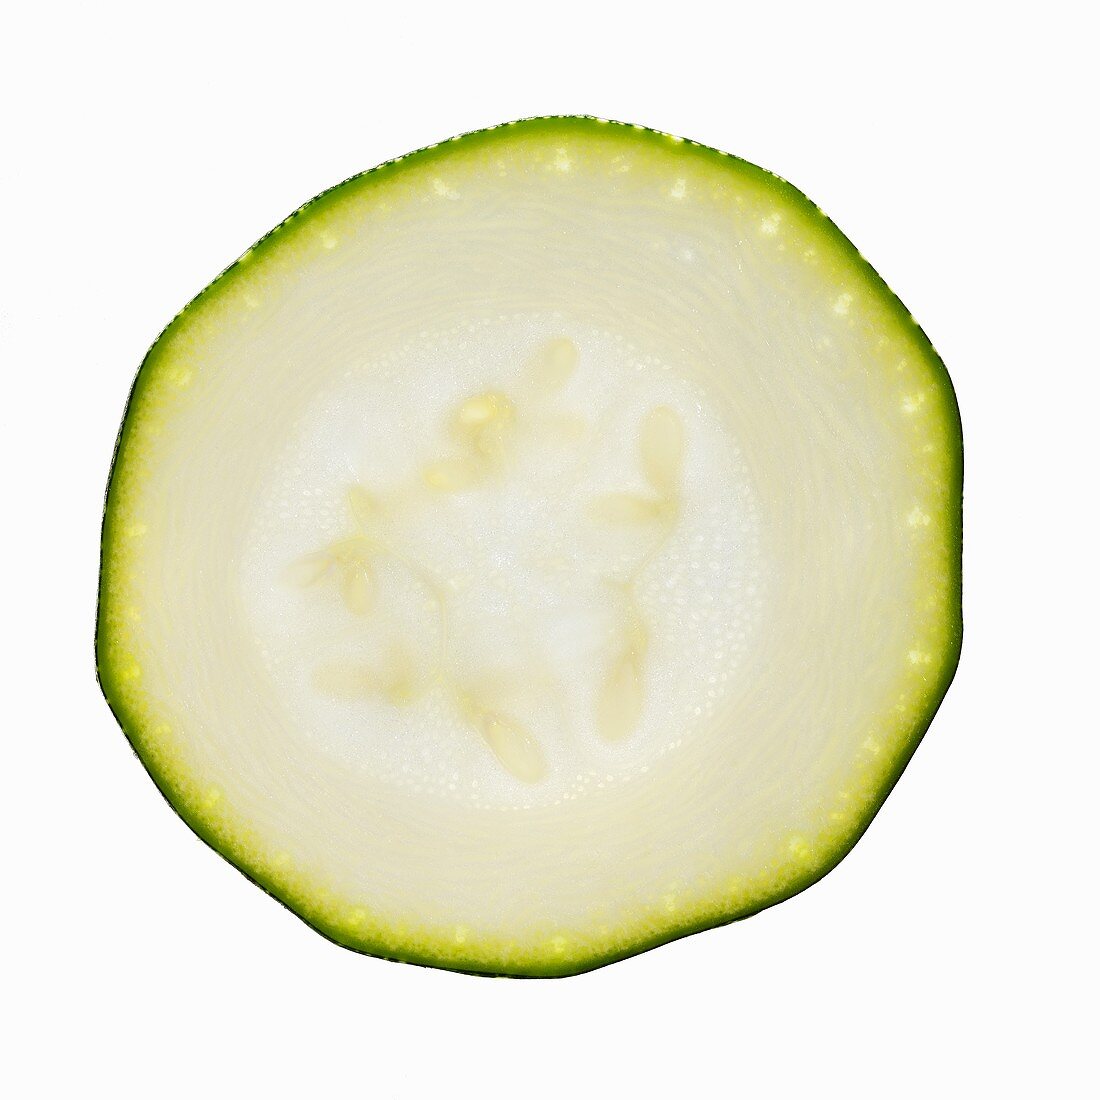 A slice of courgette